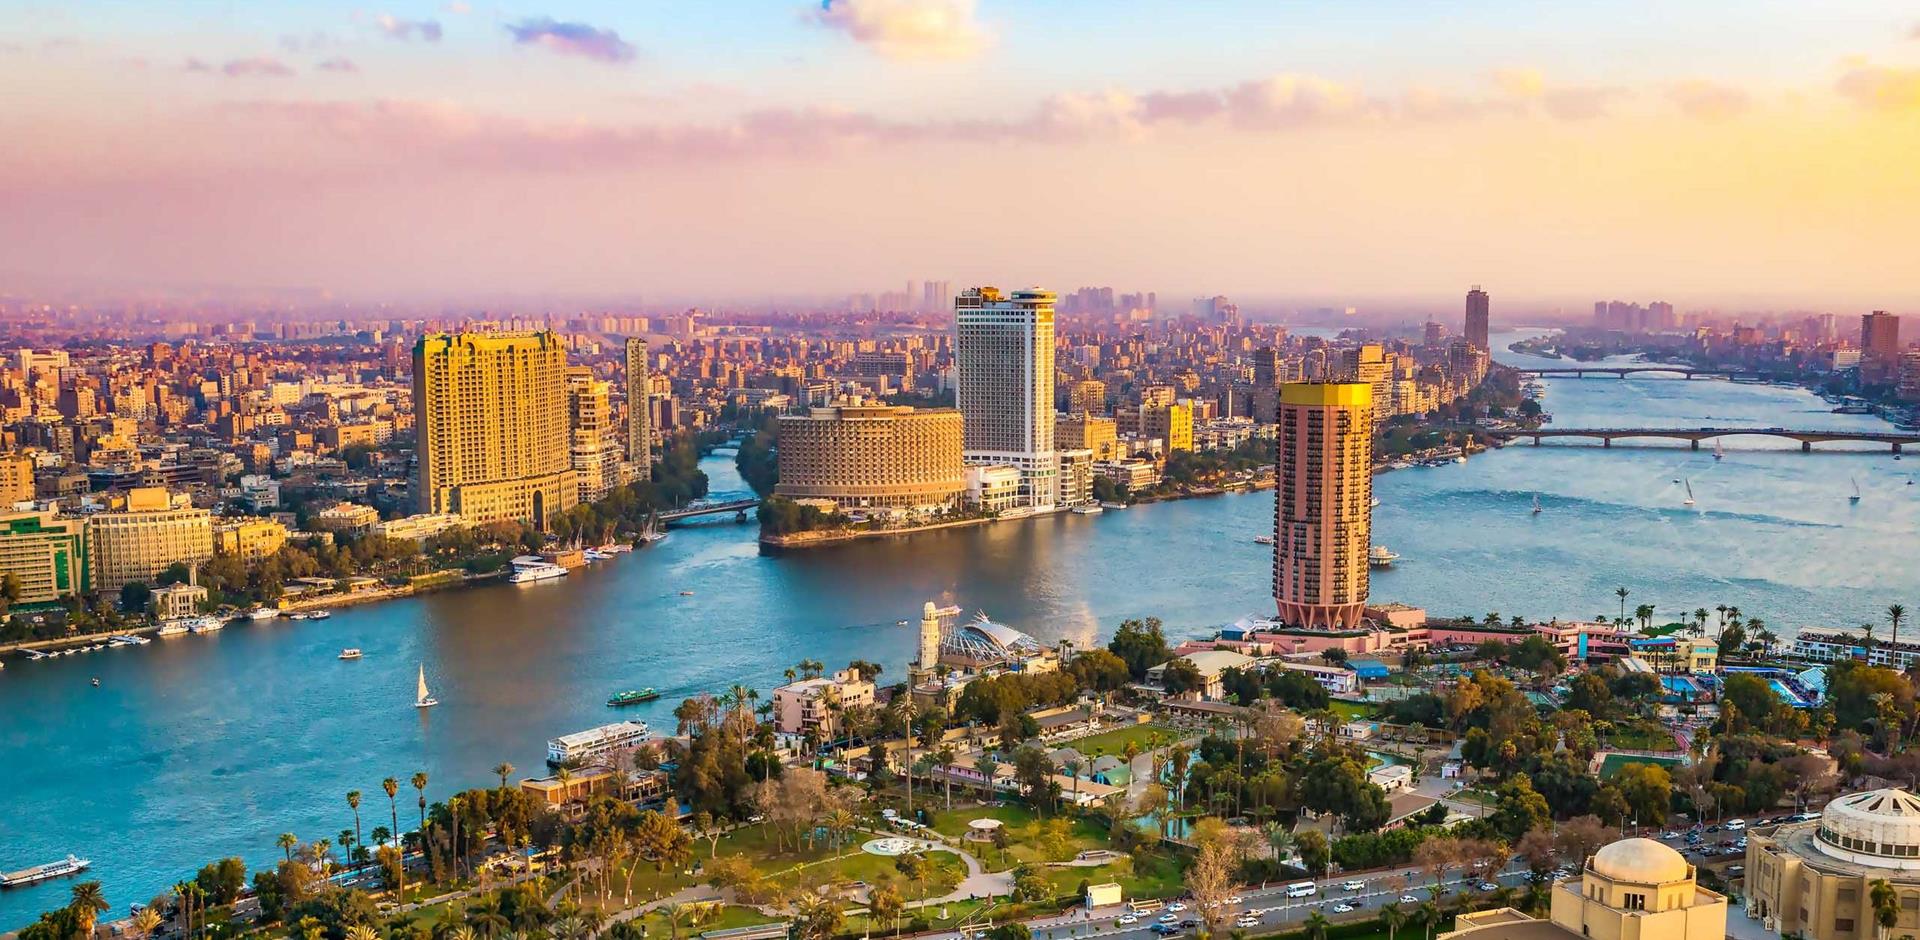 View of Nile and downtown Cairo, Egypt